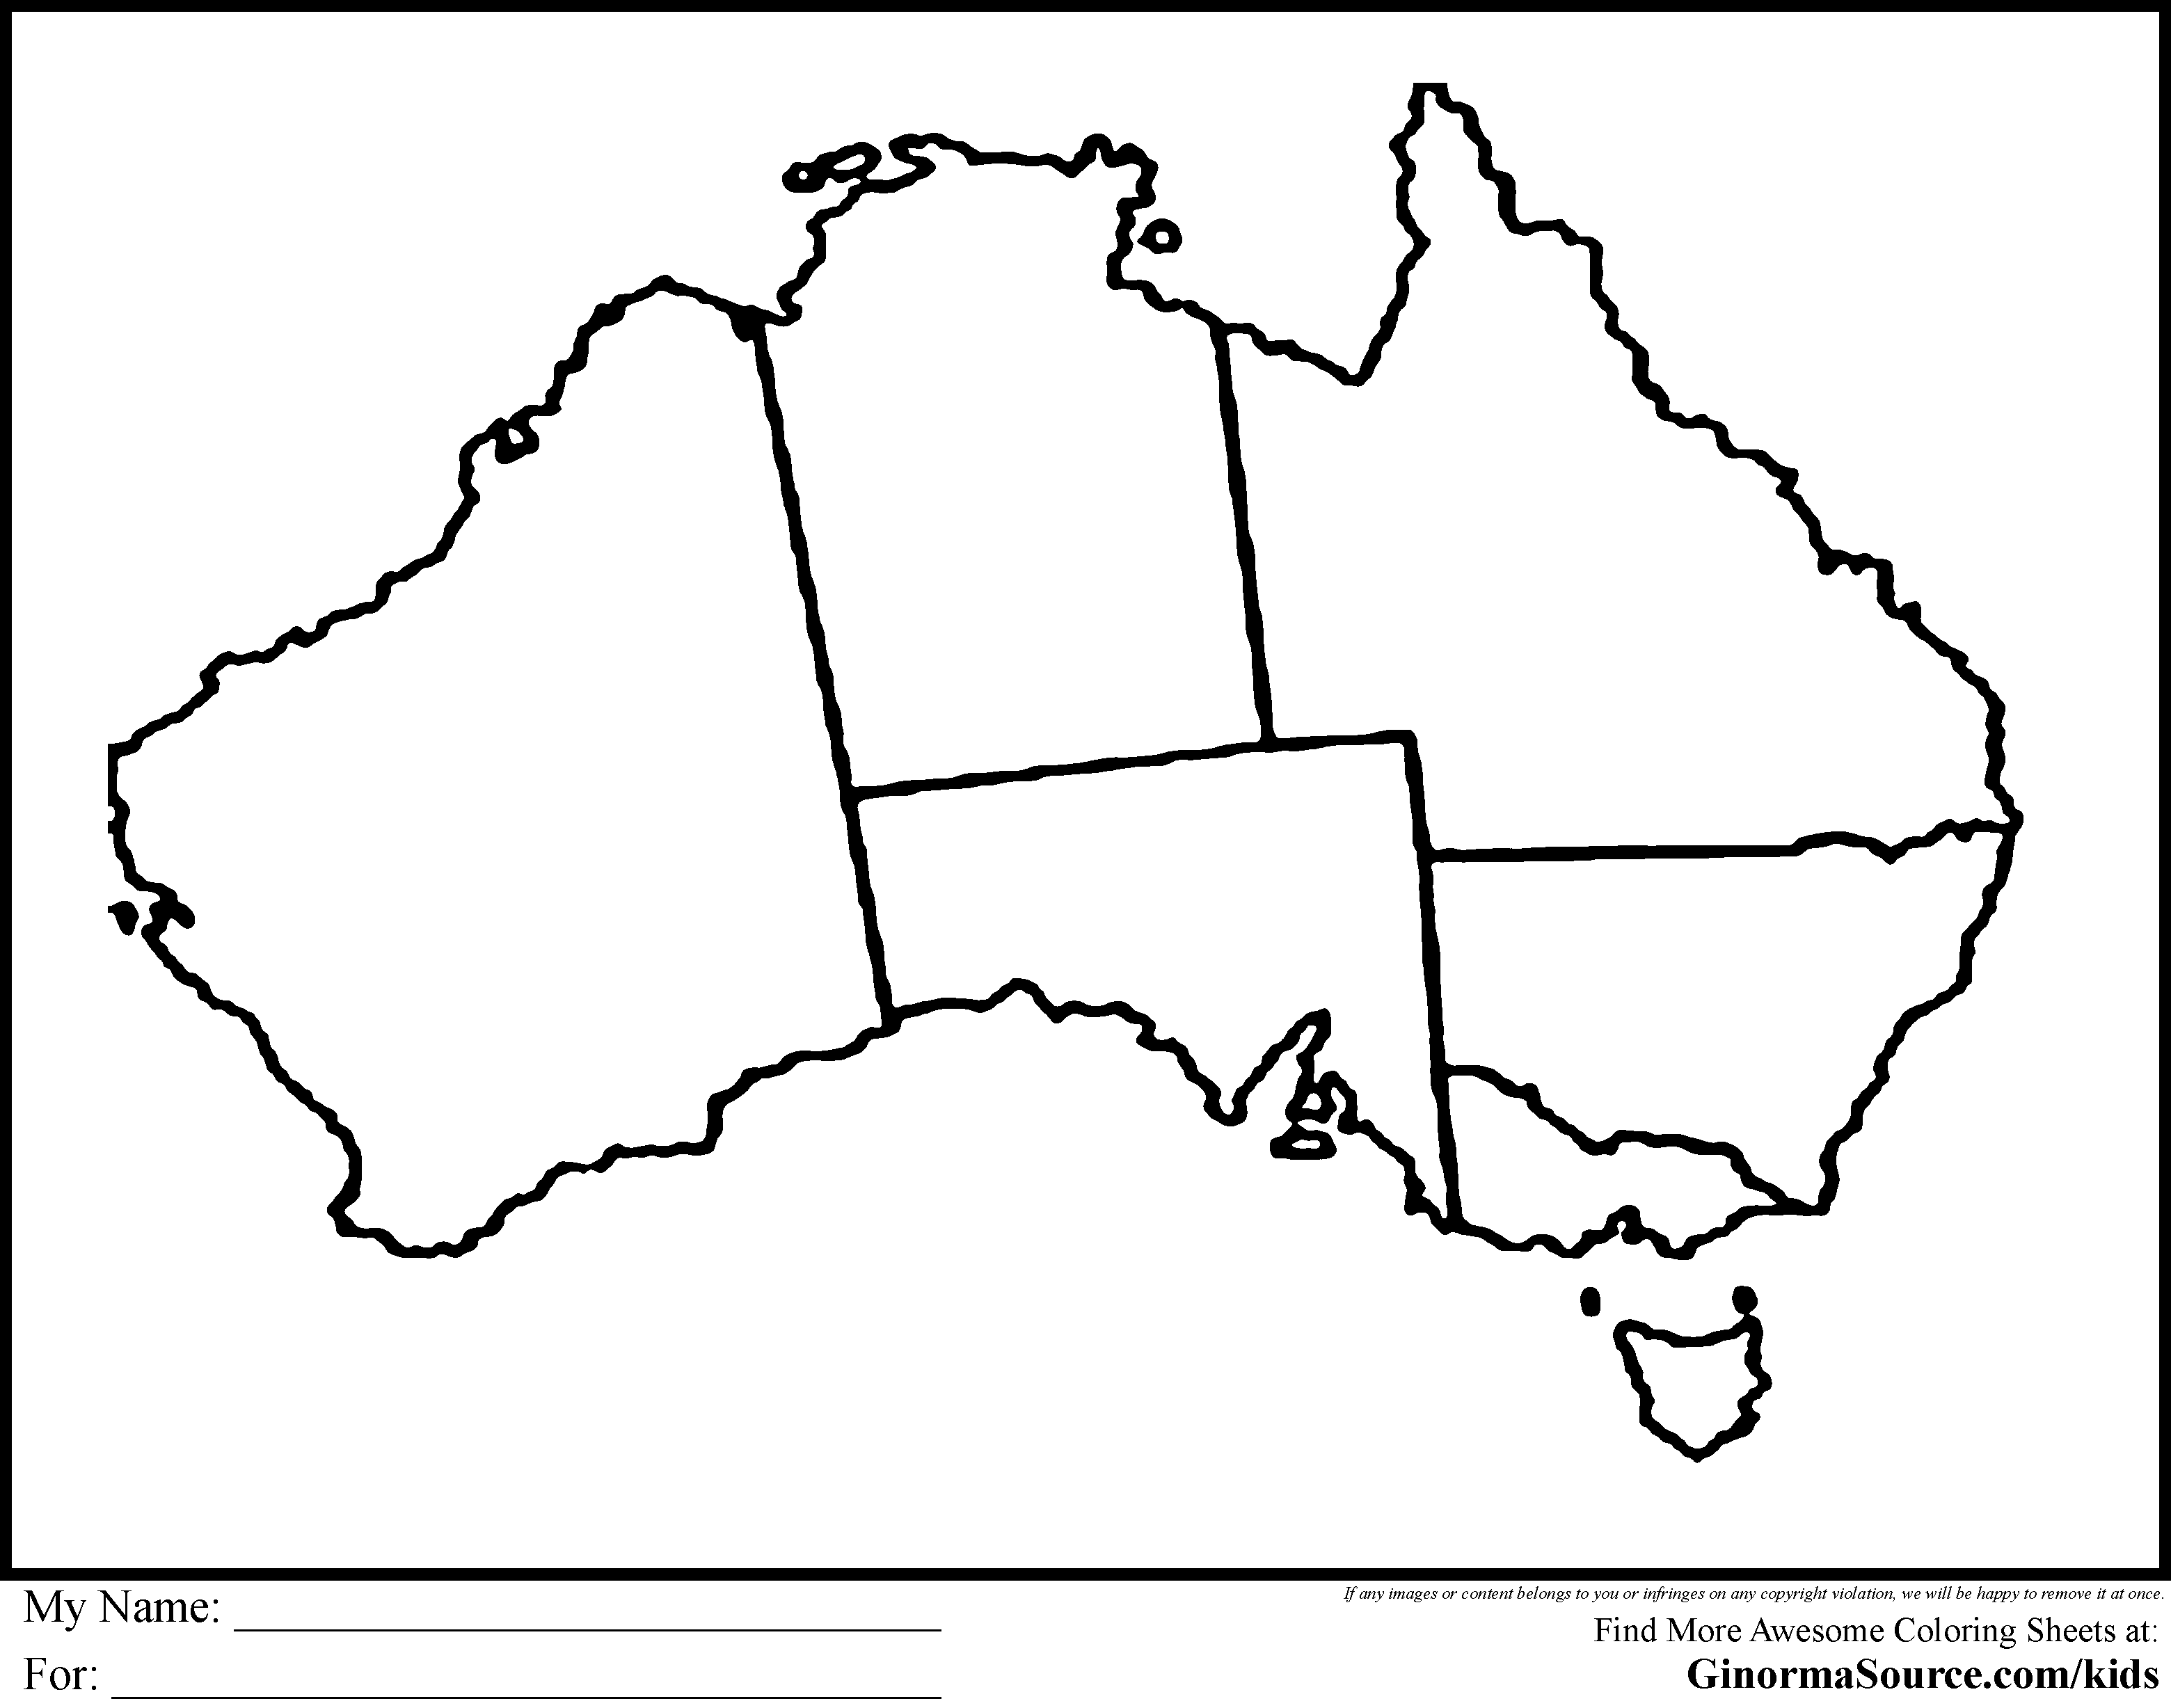 39-australia-map-coloring-pages